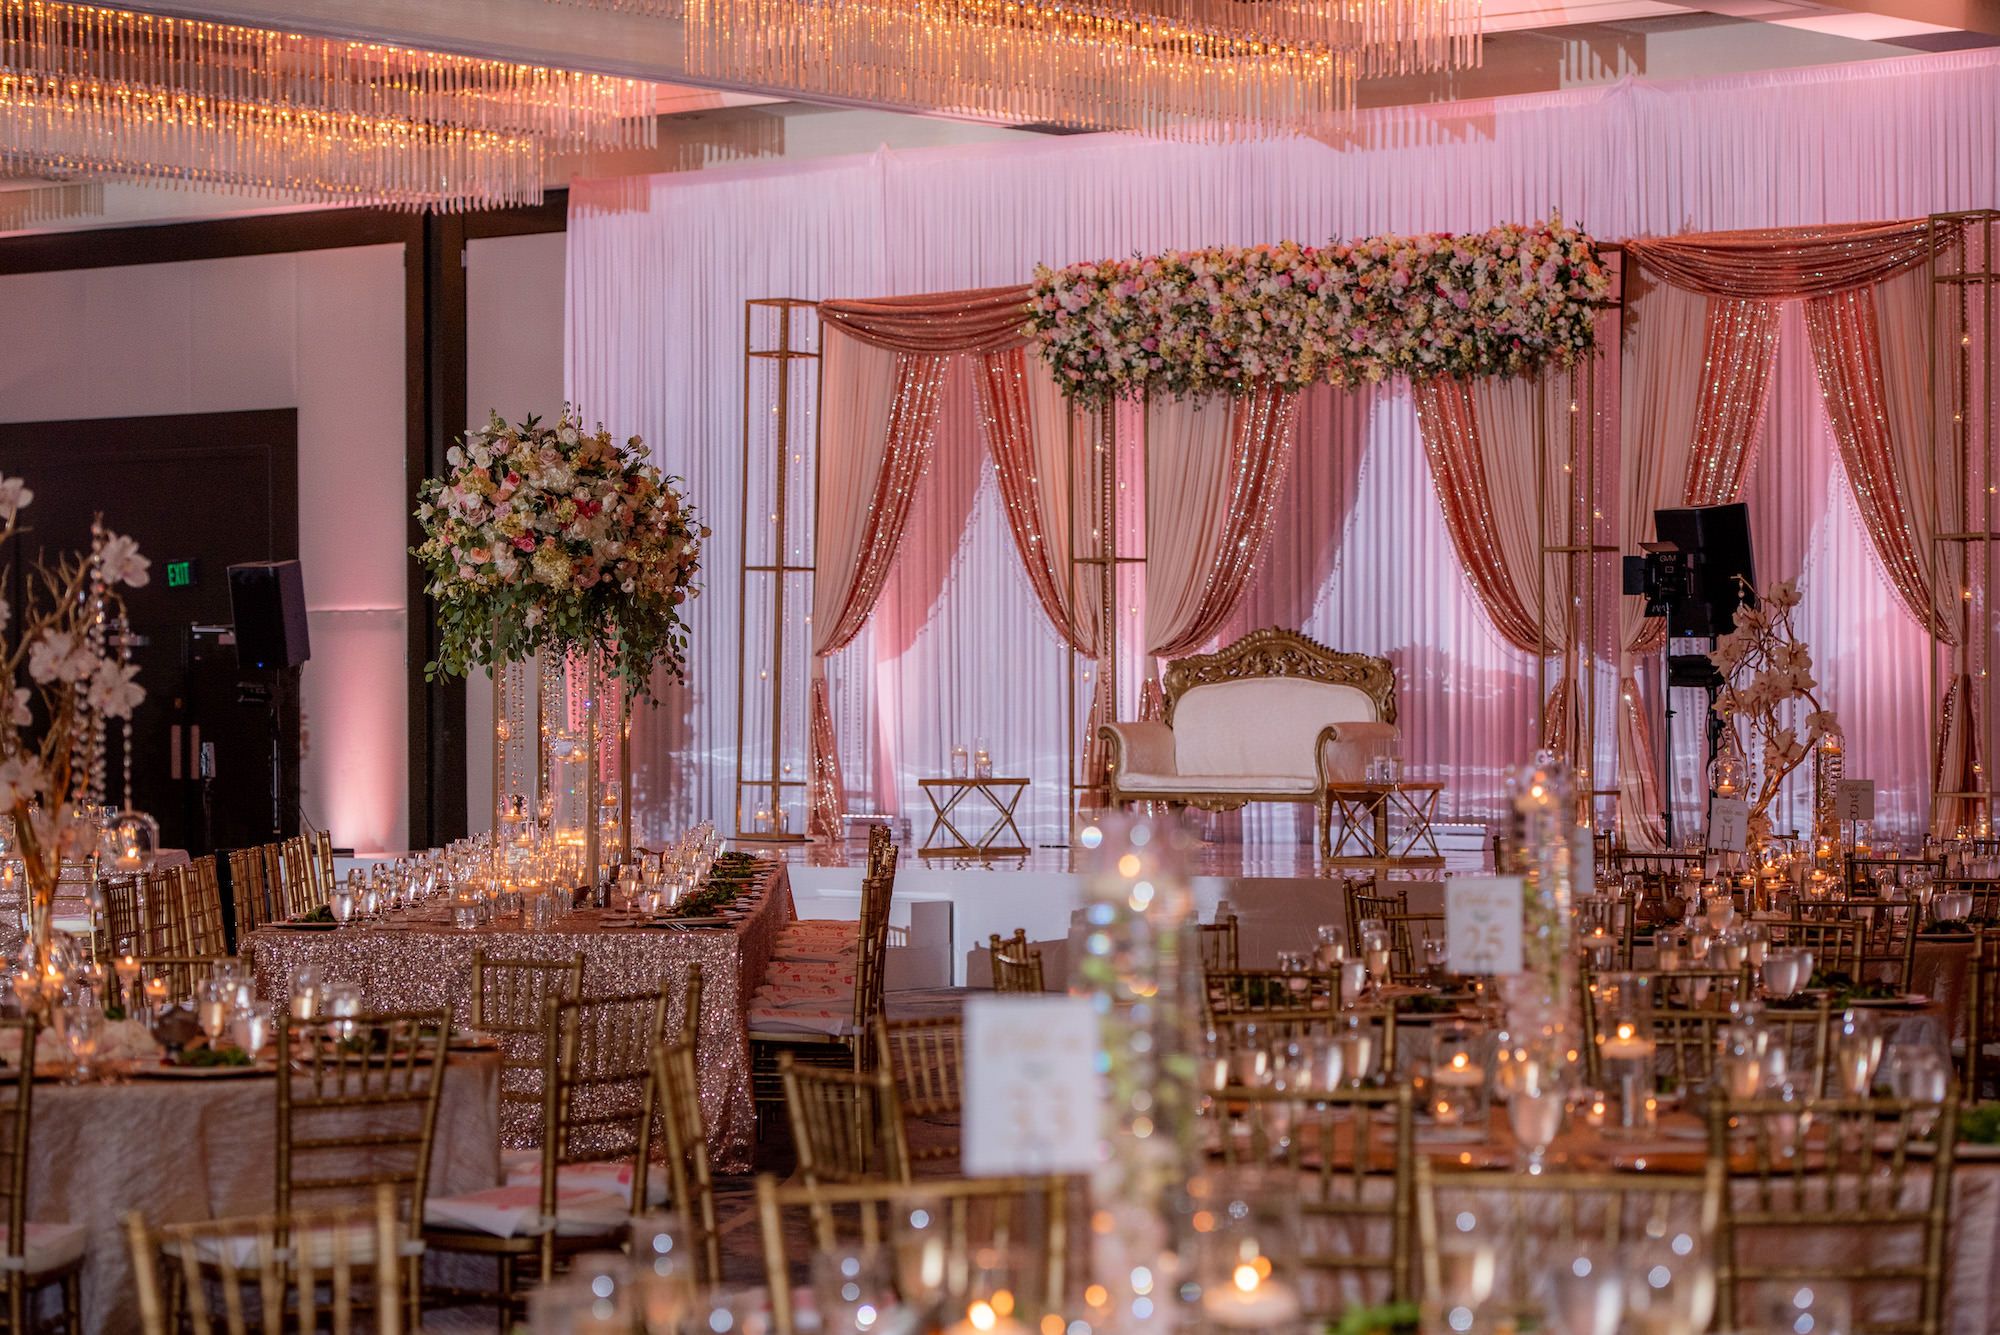 Modern Luxurious Ballroom Wedding Reception, Pink Draping, Mandap with Sweetheart Satee, Round Tables with Rose Gold Linens and Chiavari Chair, Tall Floral Centerpieces| Florida Wedding Venue Hilton Downtown Tampa